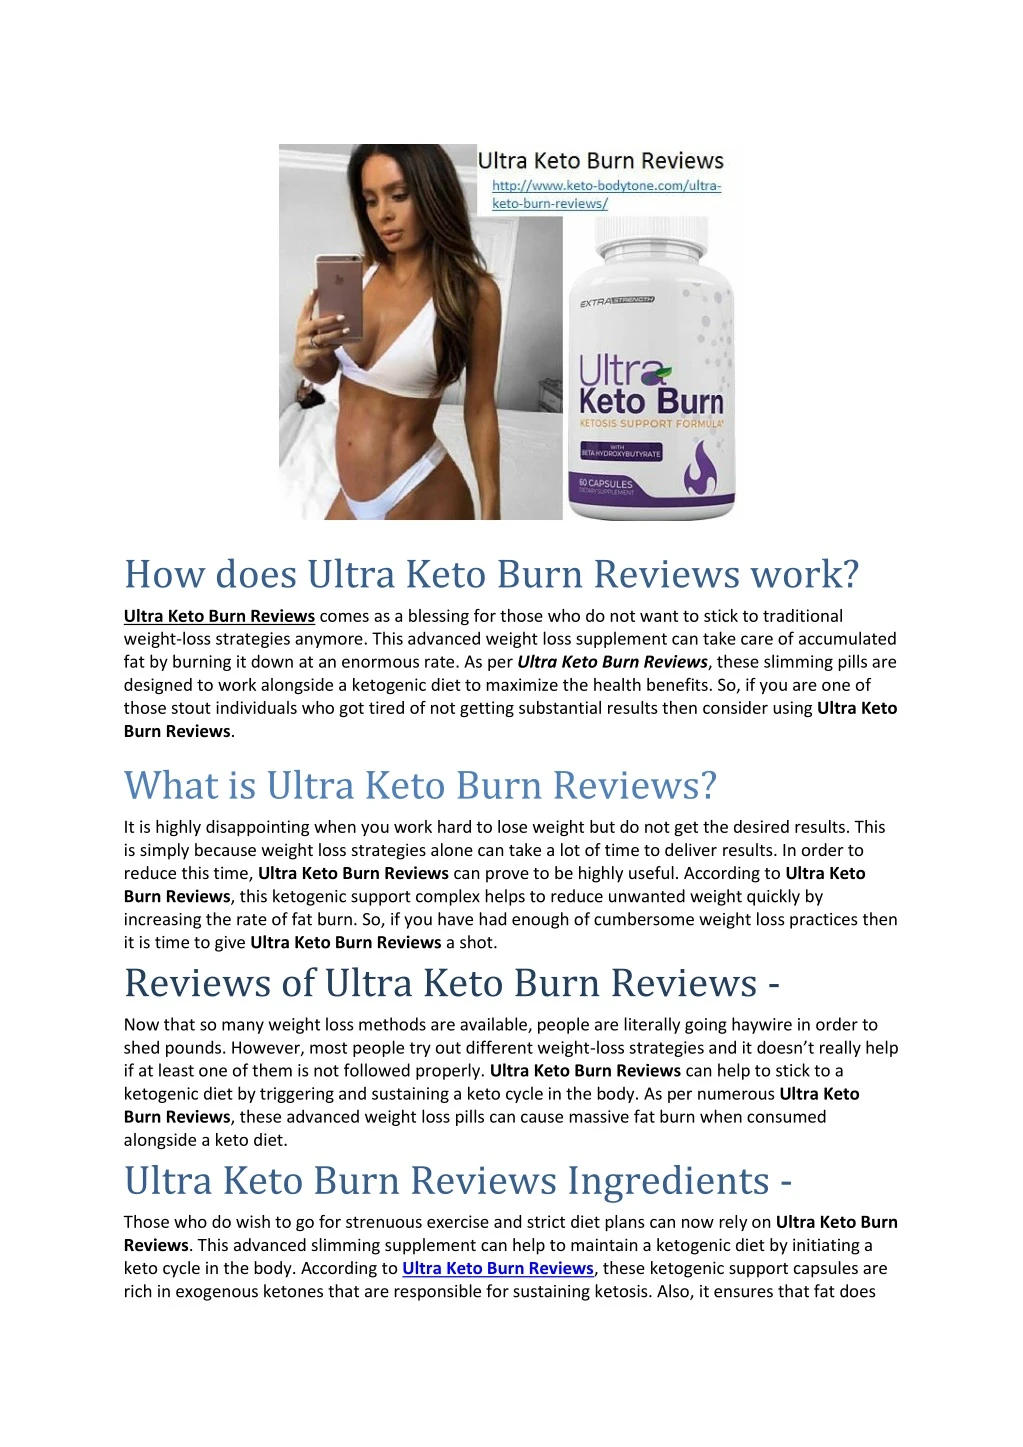 how does ultra keto burn reviews work